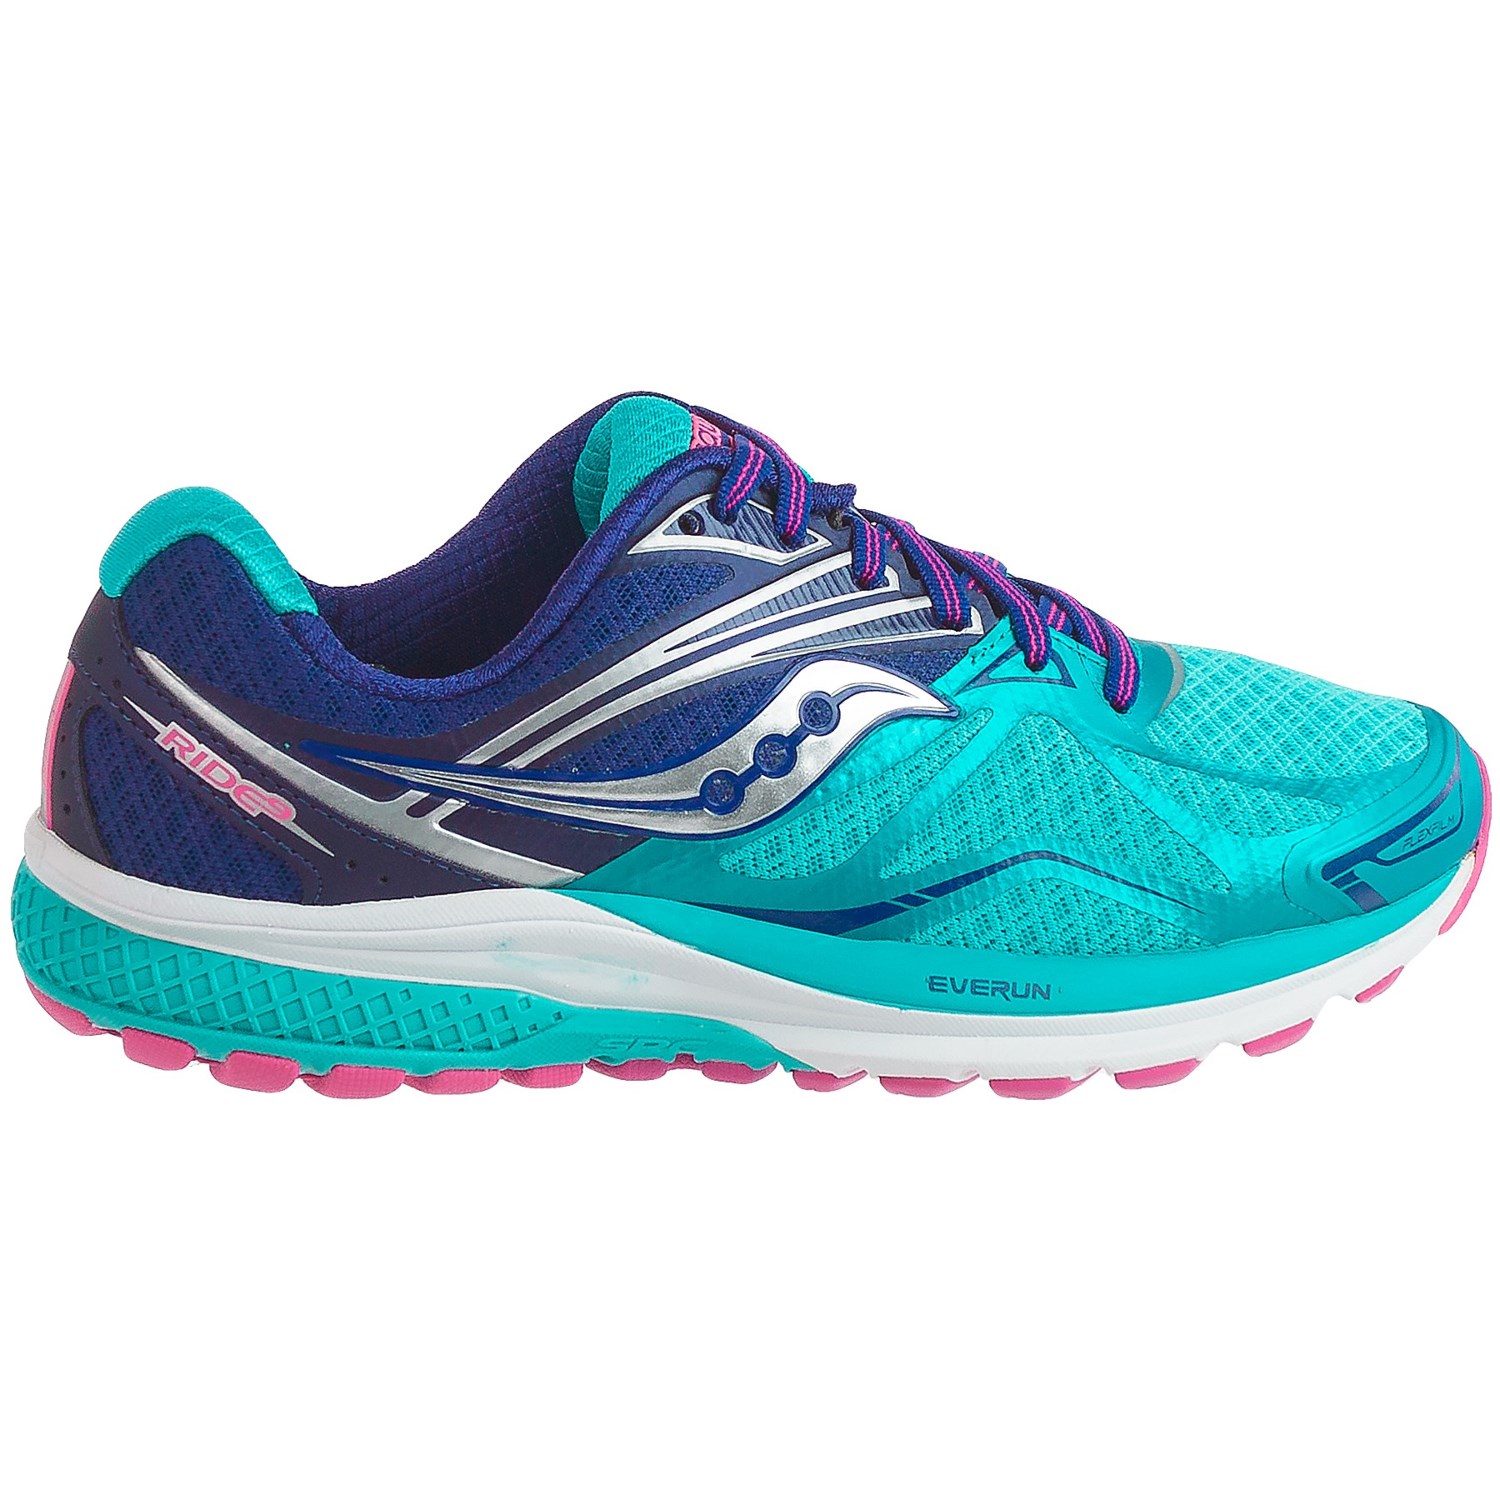 saucony running shoes saucony ride 9 running shoes (for women) YVJBGBV